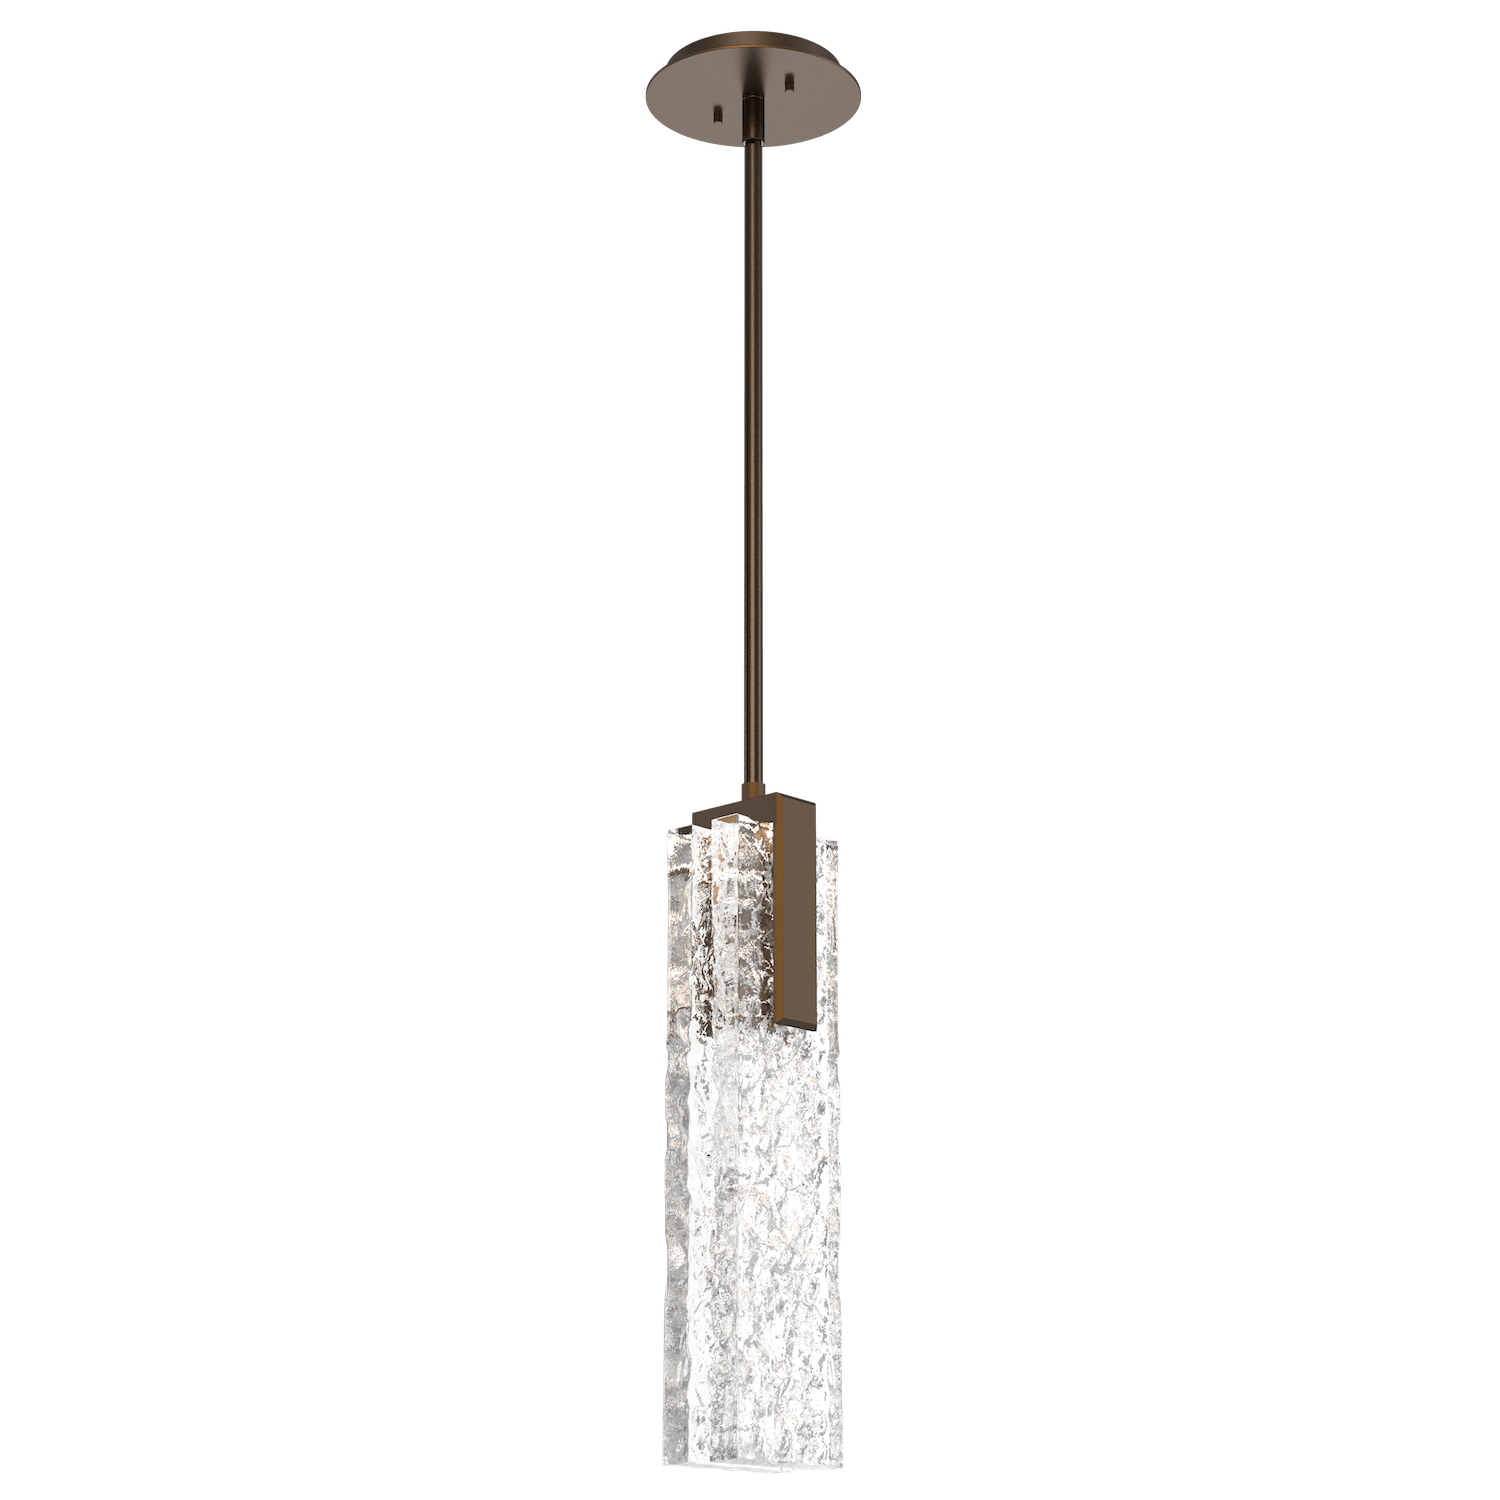 LAB0061-17-FB-GC-Hammerton-Studio-Glacier-pendant-light-with-flat-bronze-finish-and-clear-blown-glass-with-geo-clear-cast-glass-diffusers-and-LED-lamping